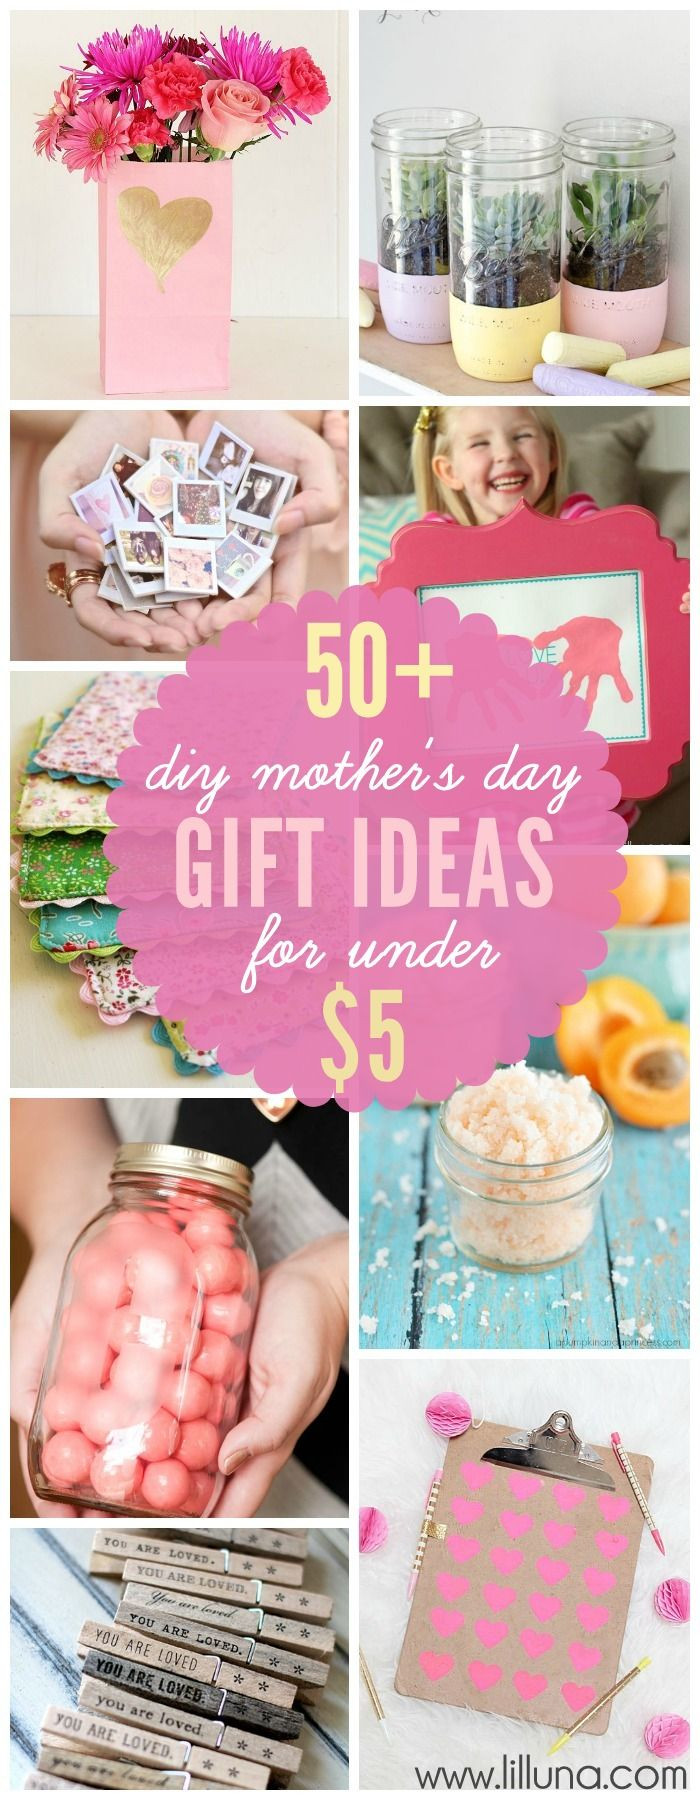 Homemade Mothers Day Ideas
 BEST Homemade Mothers Day Gifts so many great ideas